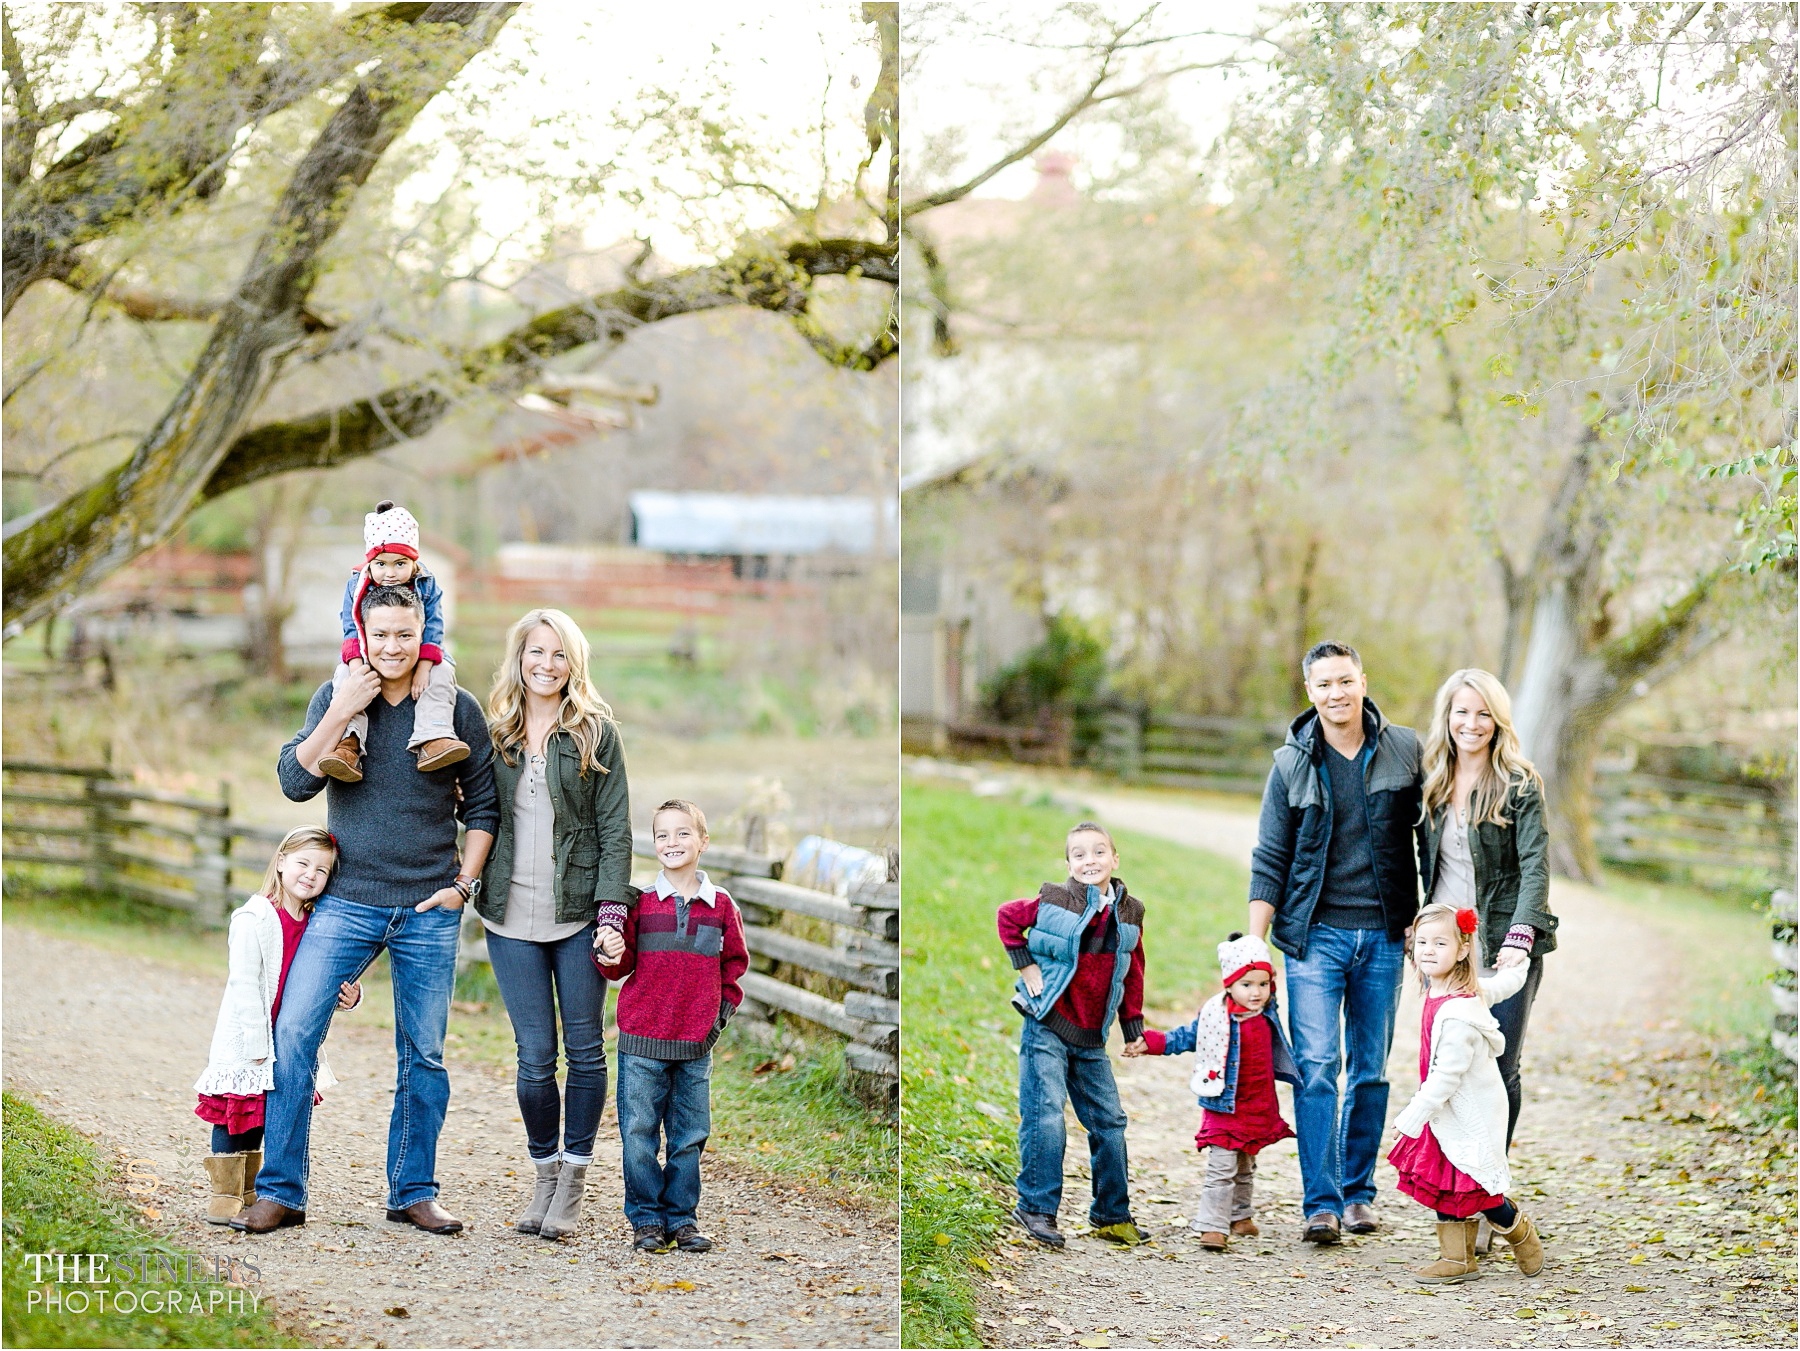 Williams Family_Indianapolis Family Photographer_TheSinersPhotography_0010